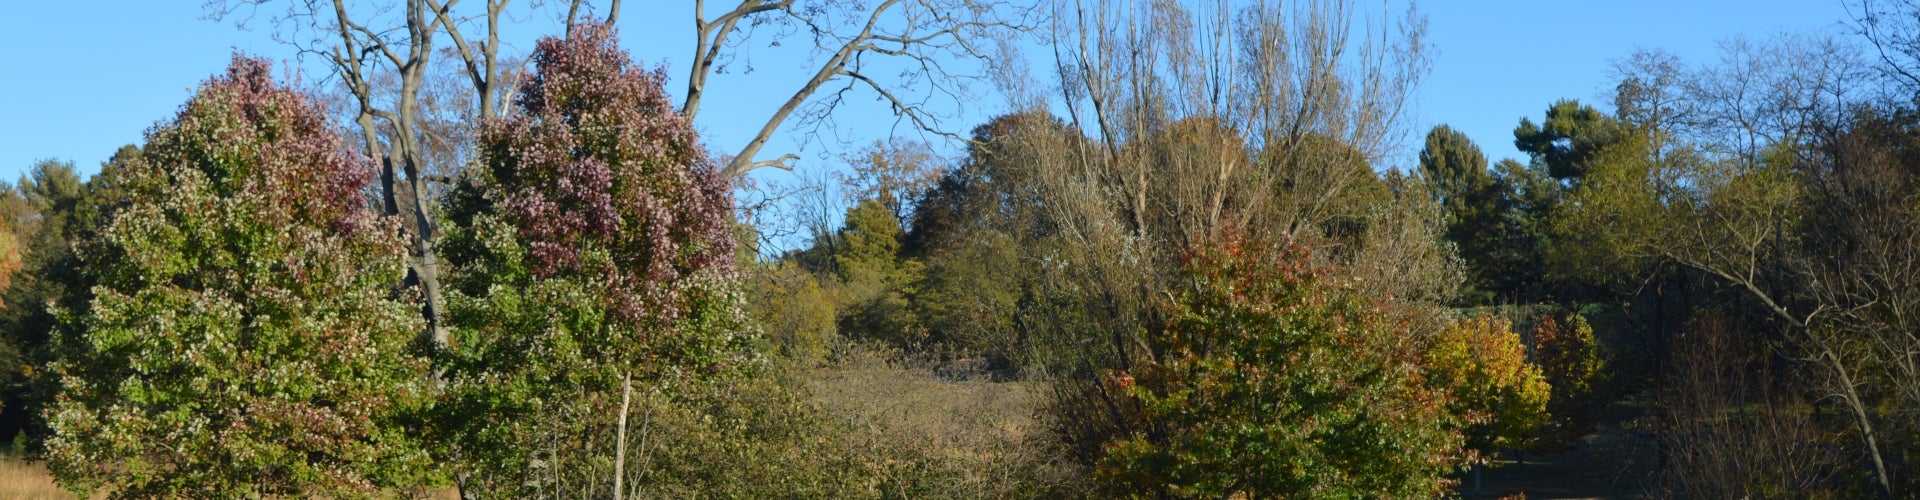 A group of all different kinds of trees growing in a natural area. 